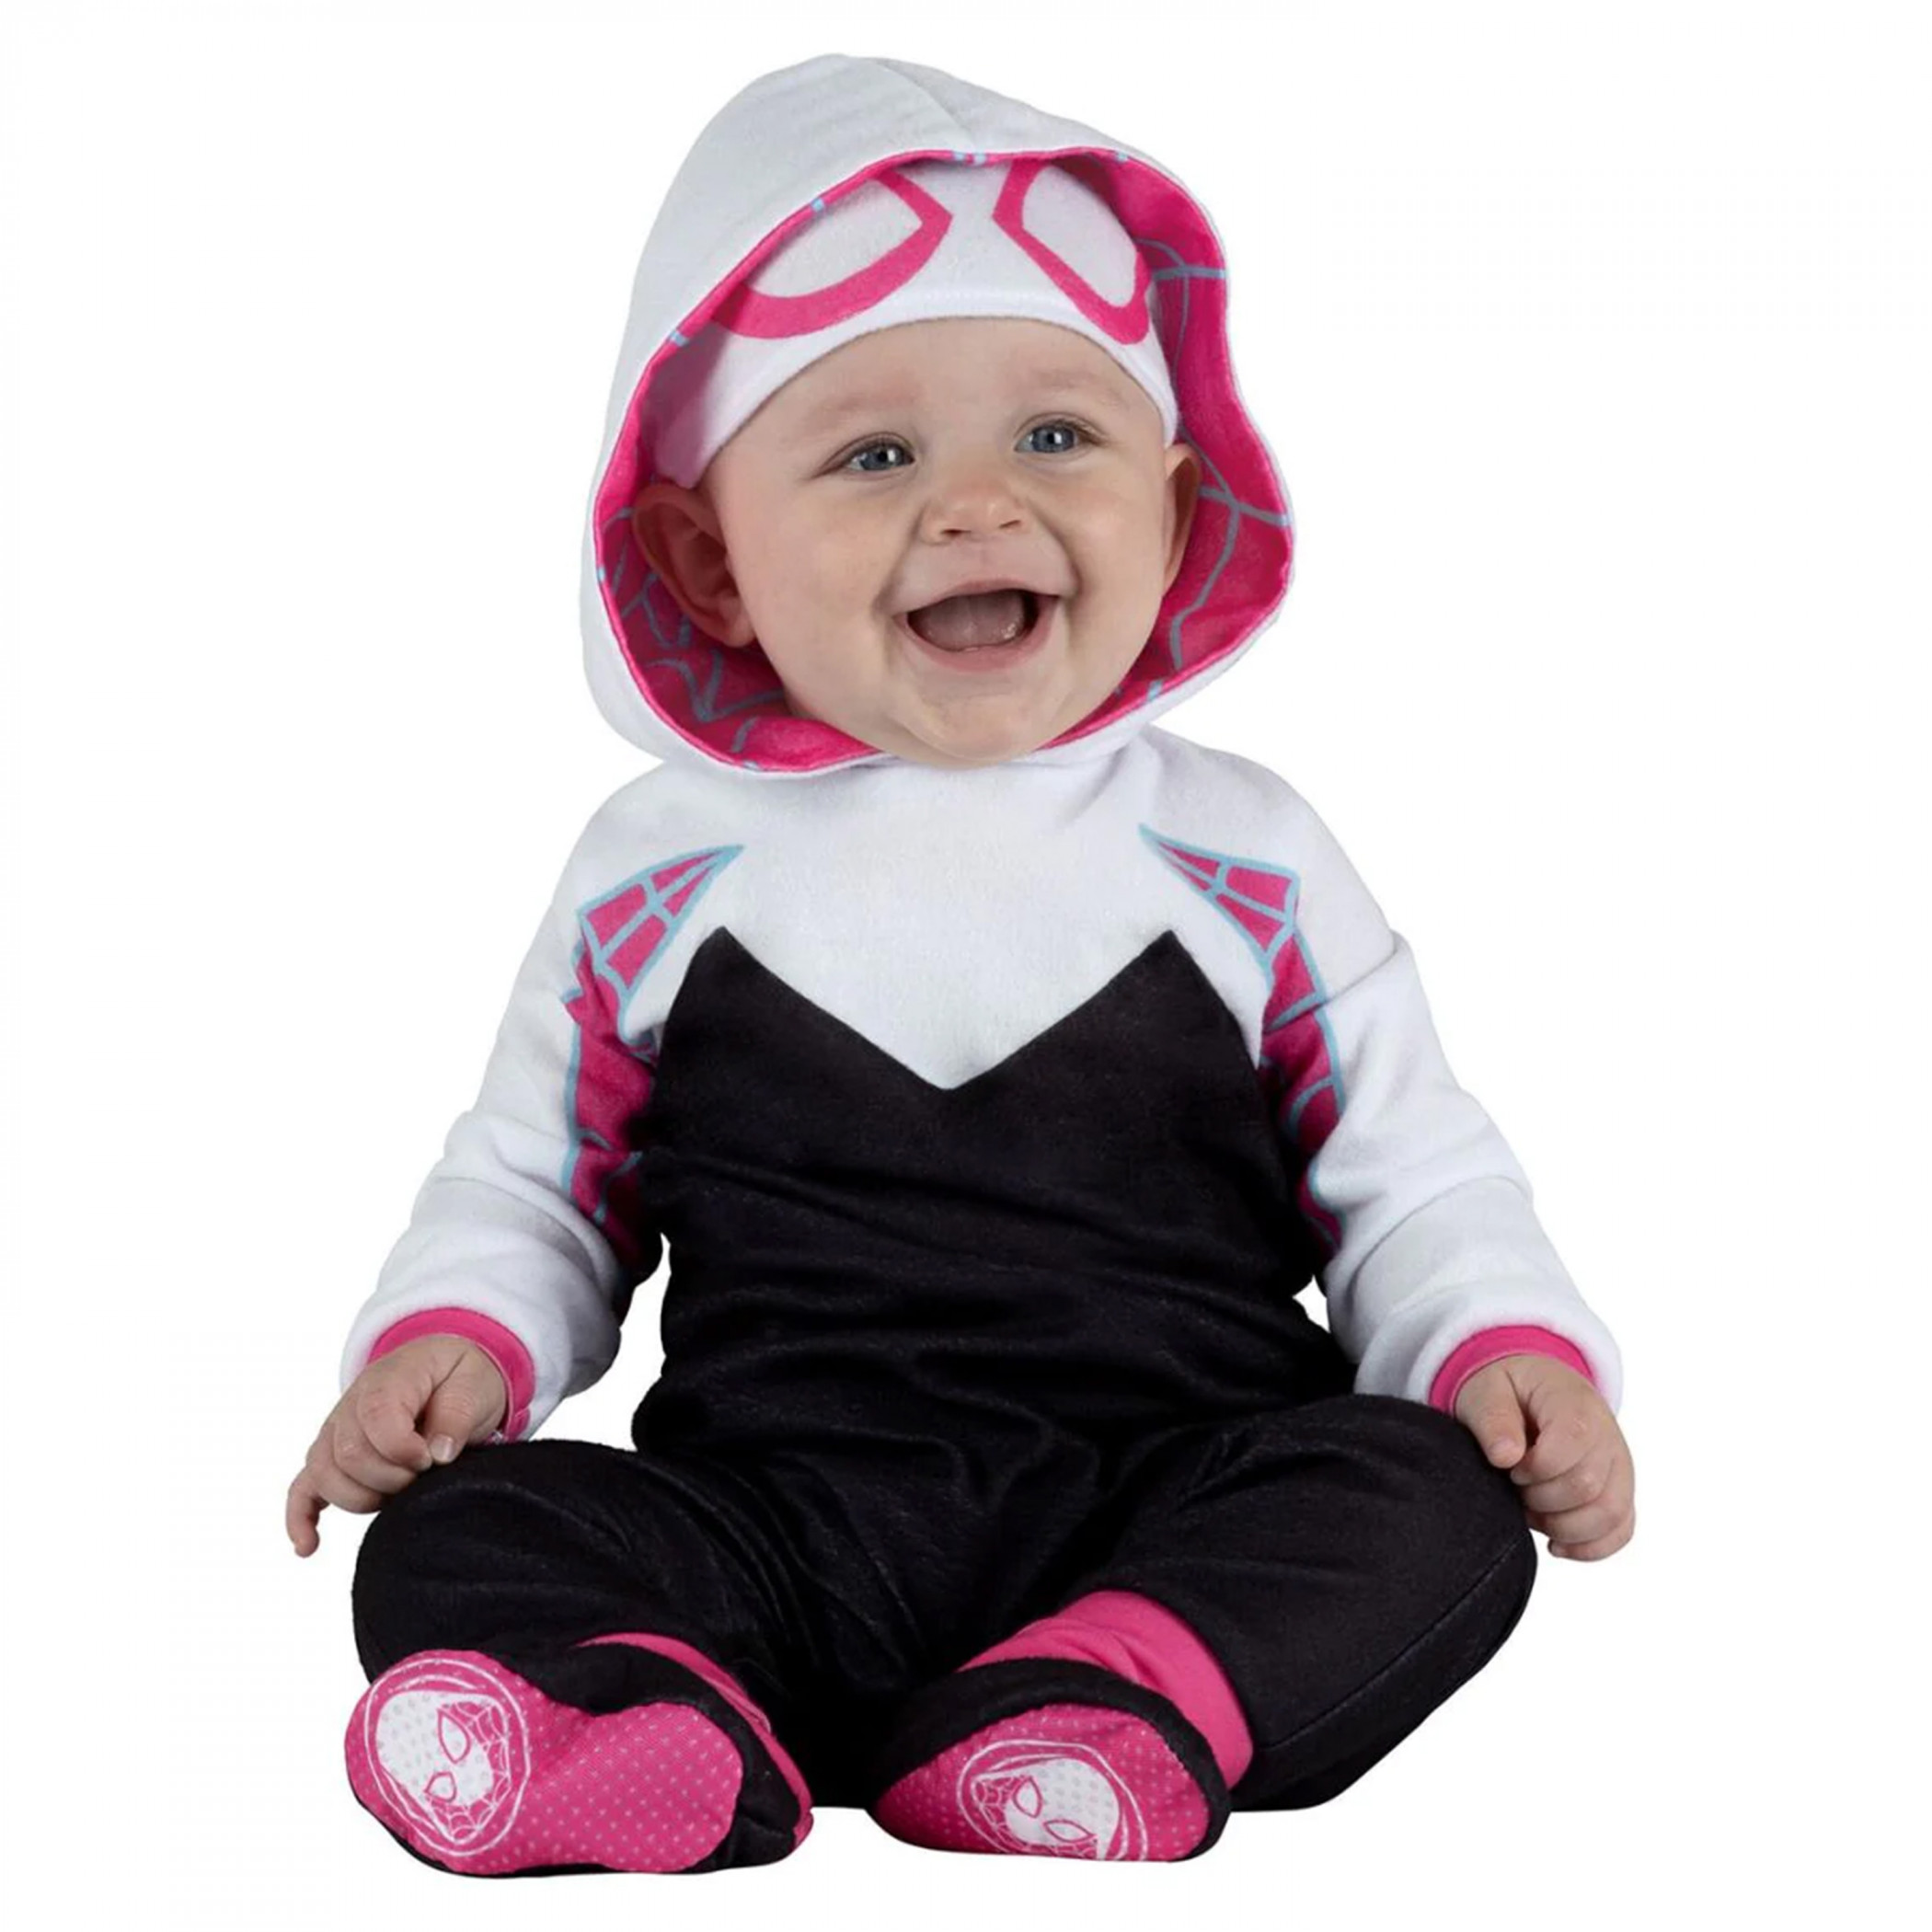 Spider-Gwen Infant Costume with Non-Slip Booties